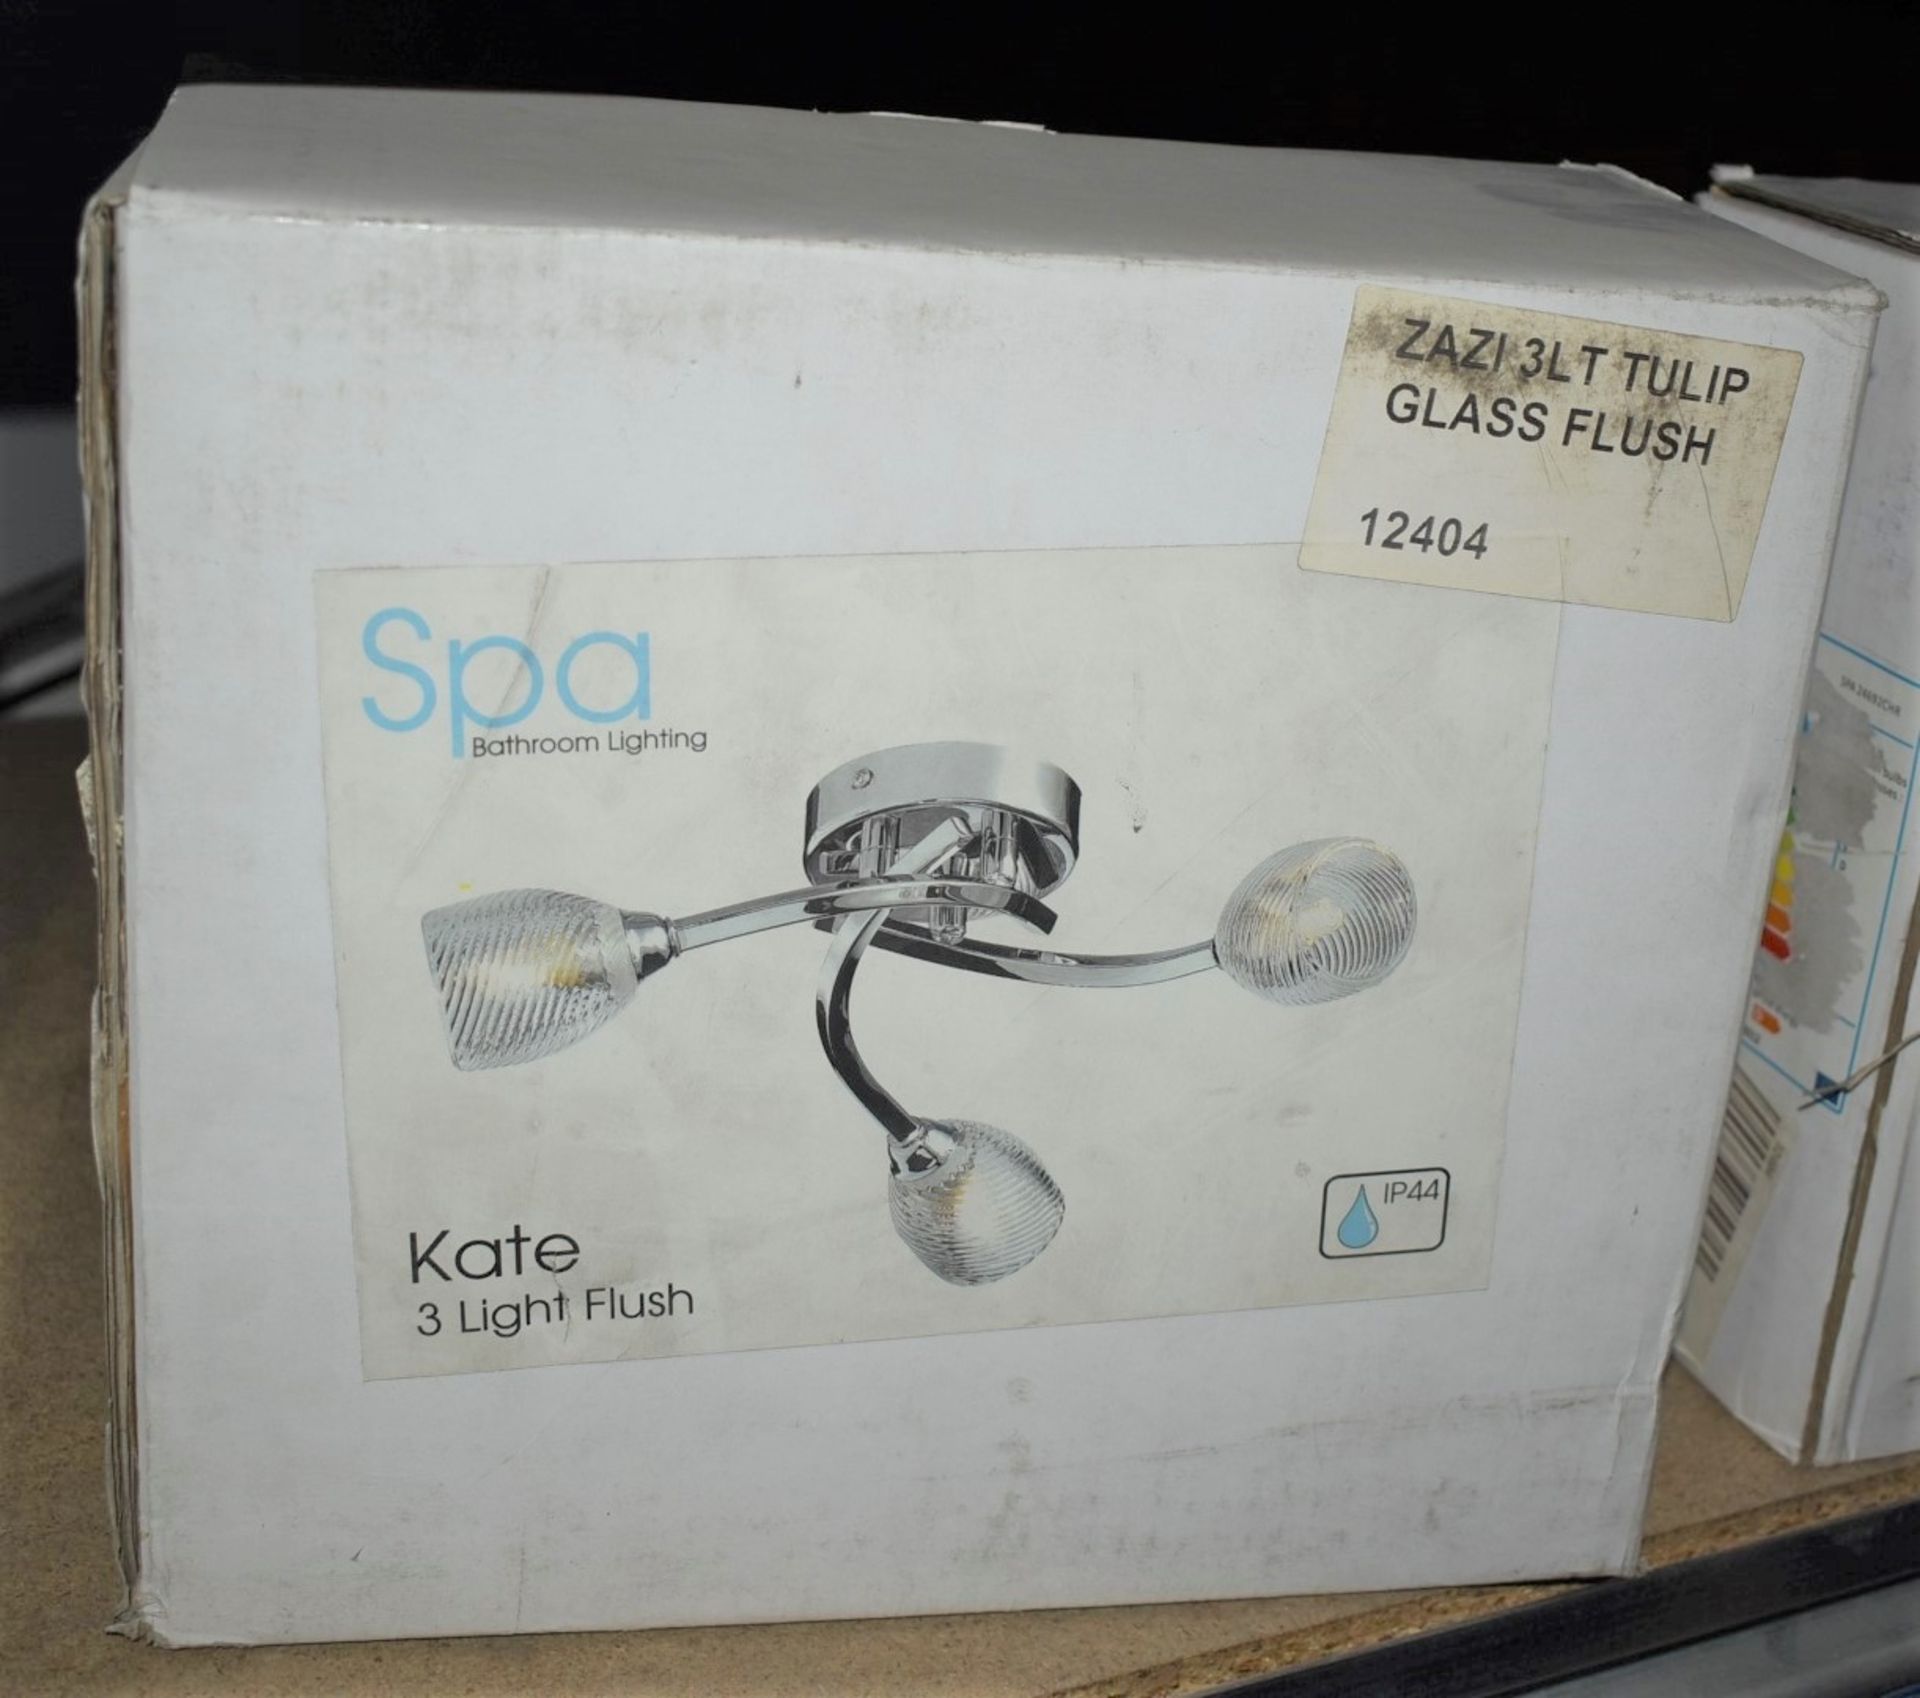 1 x Spa Bathroom Lighting - Kate 3 Light Flush Fitting With Tulip Glass Shades - Unused Boxed - Image 2 of 2